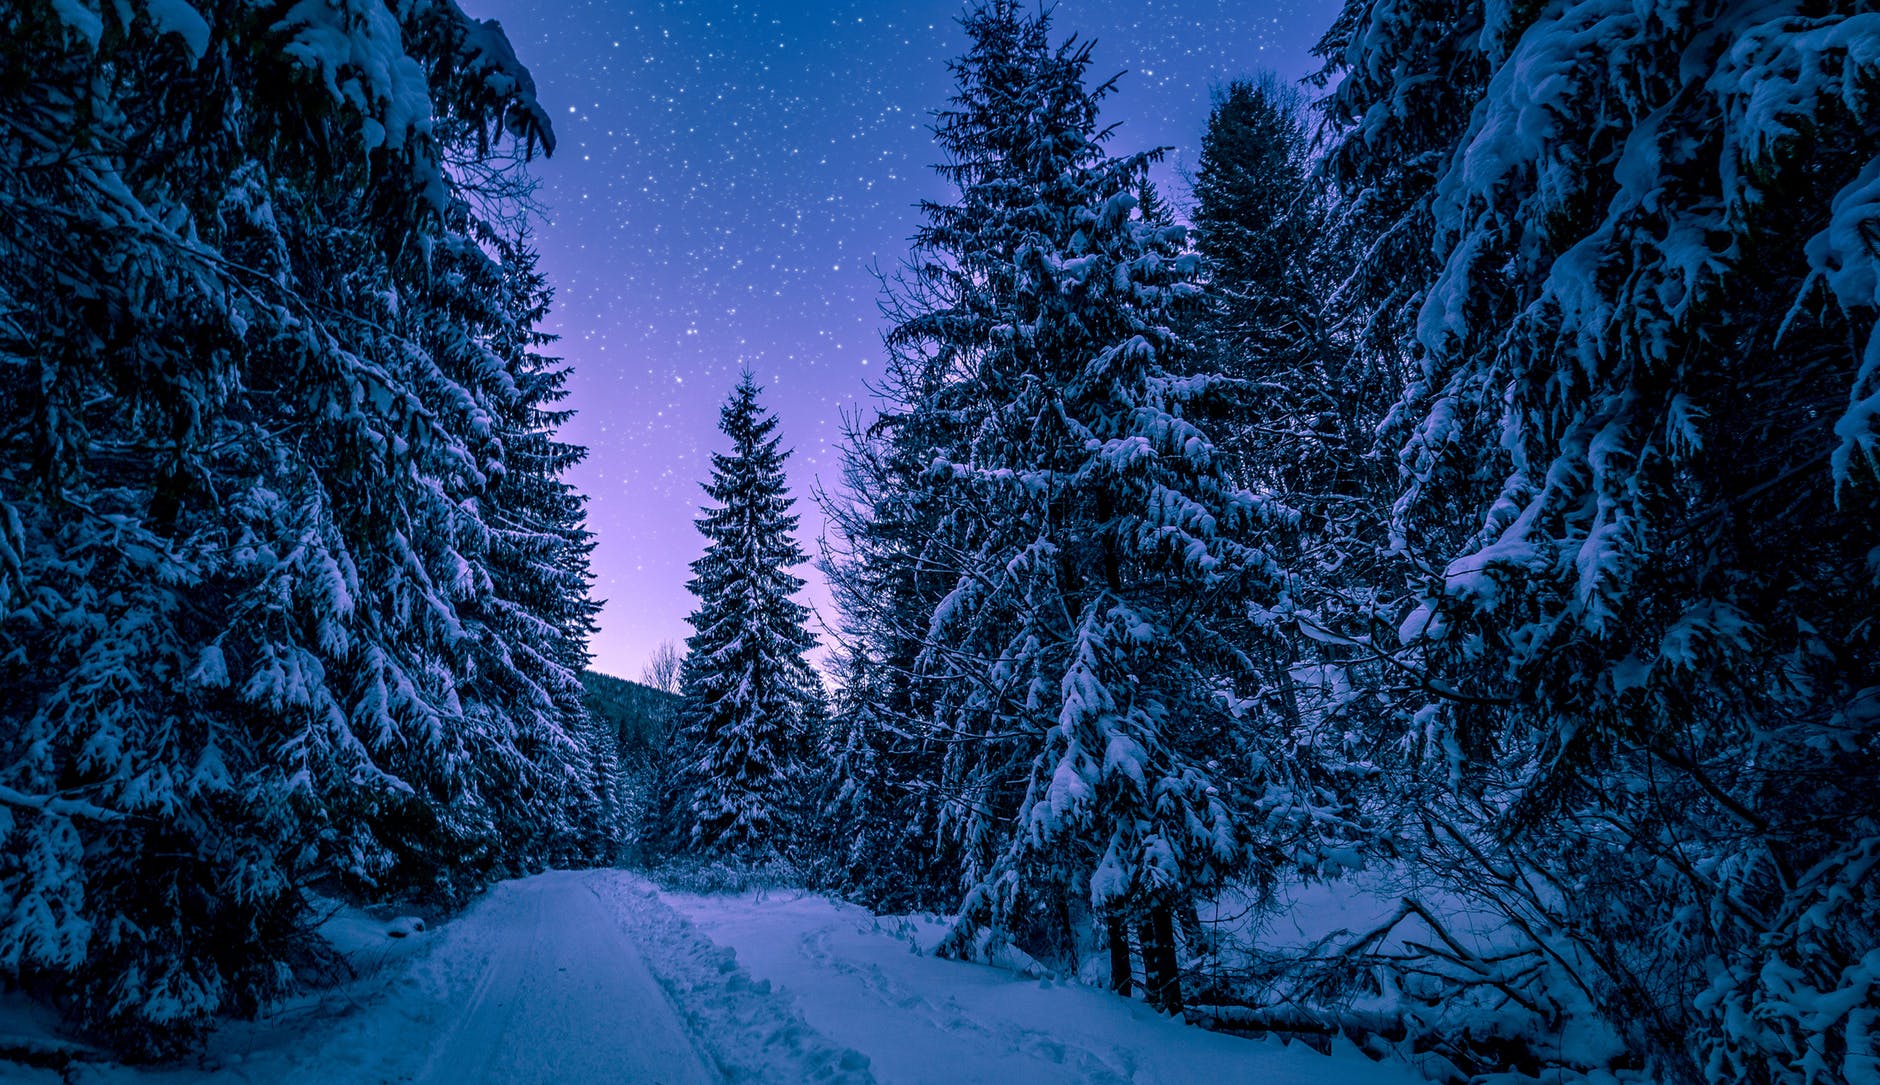 Stopping by Woods on a Snowy Evening